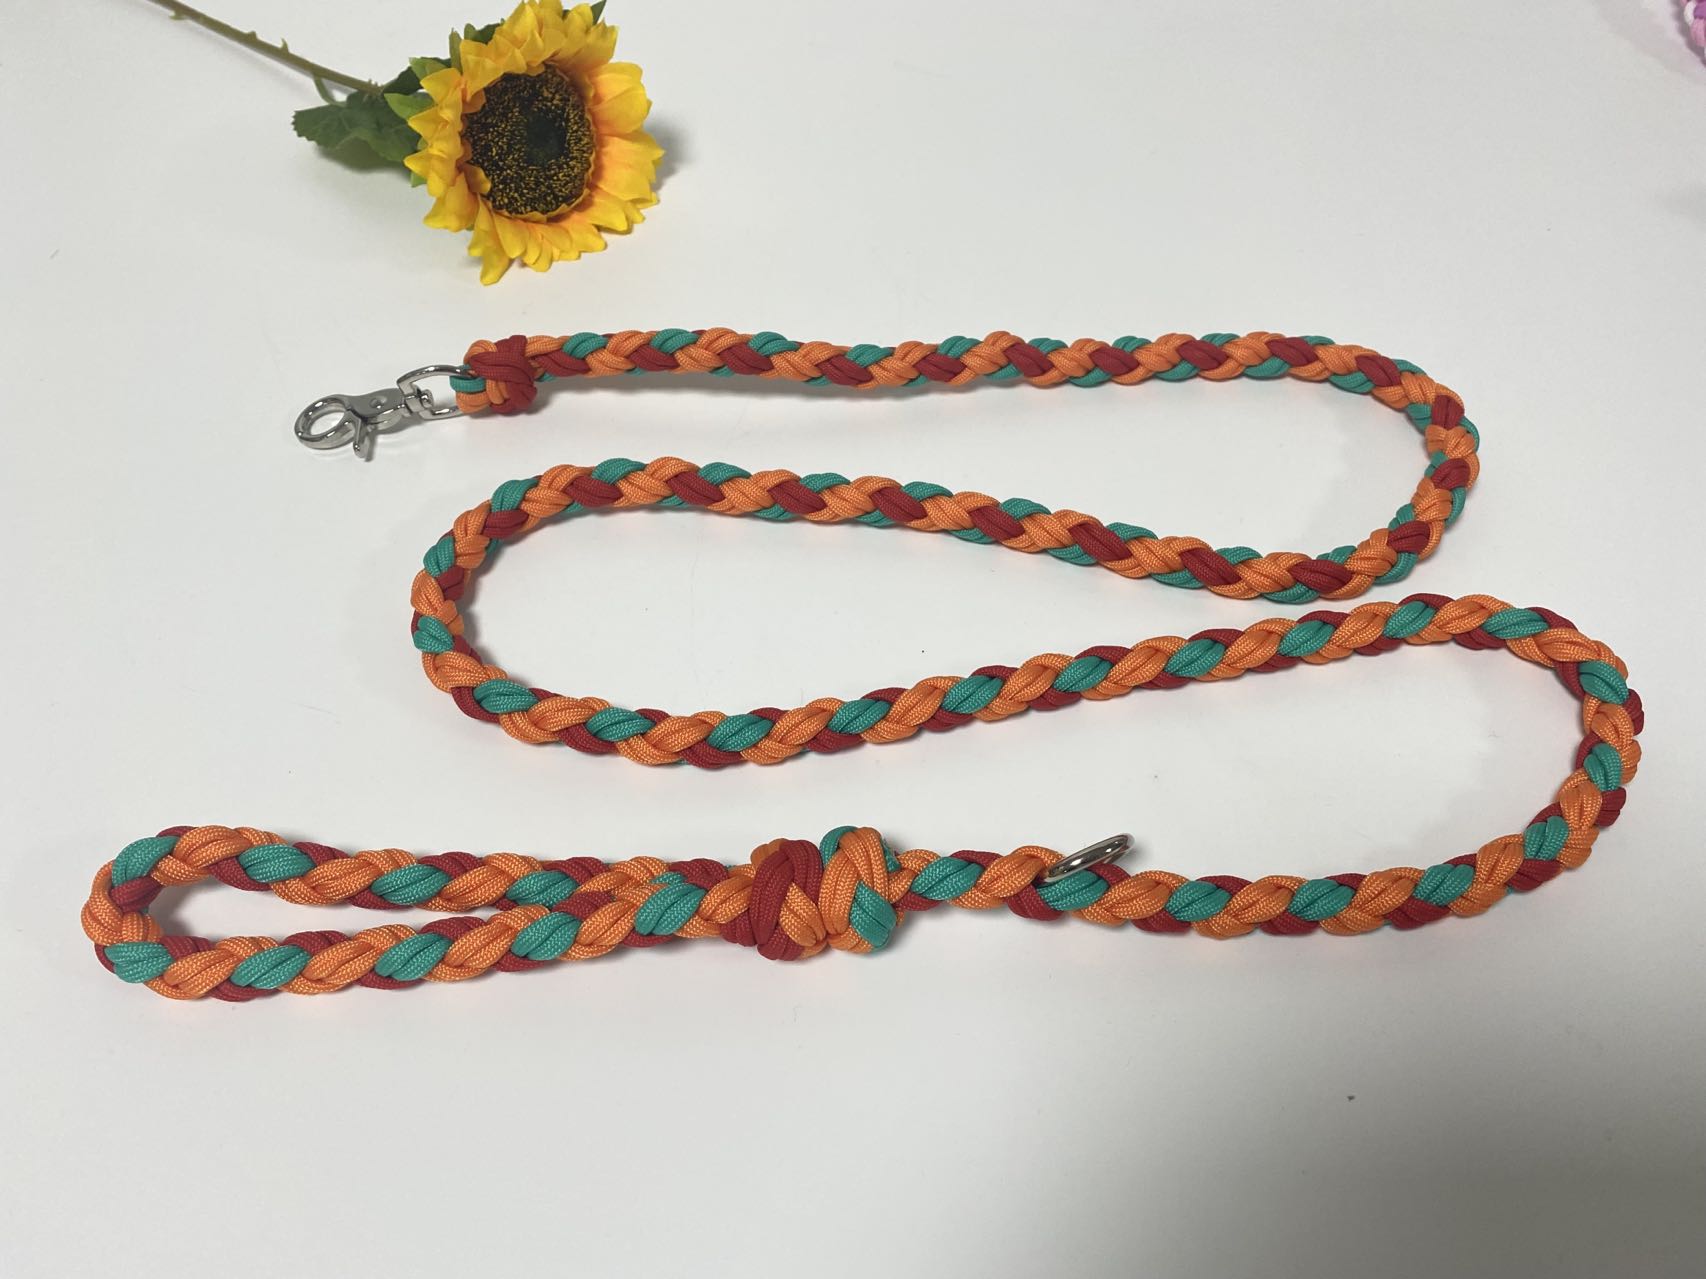 Paracord Dog Leash With Clasp